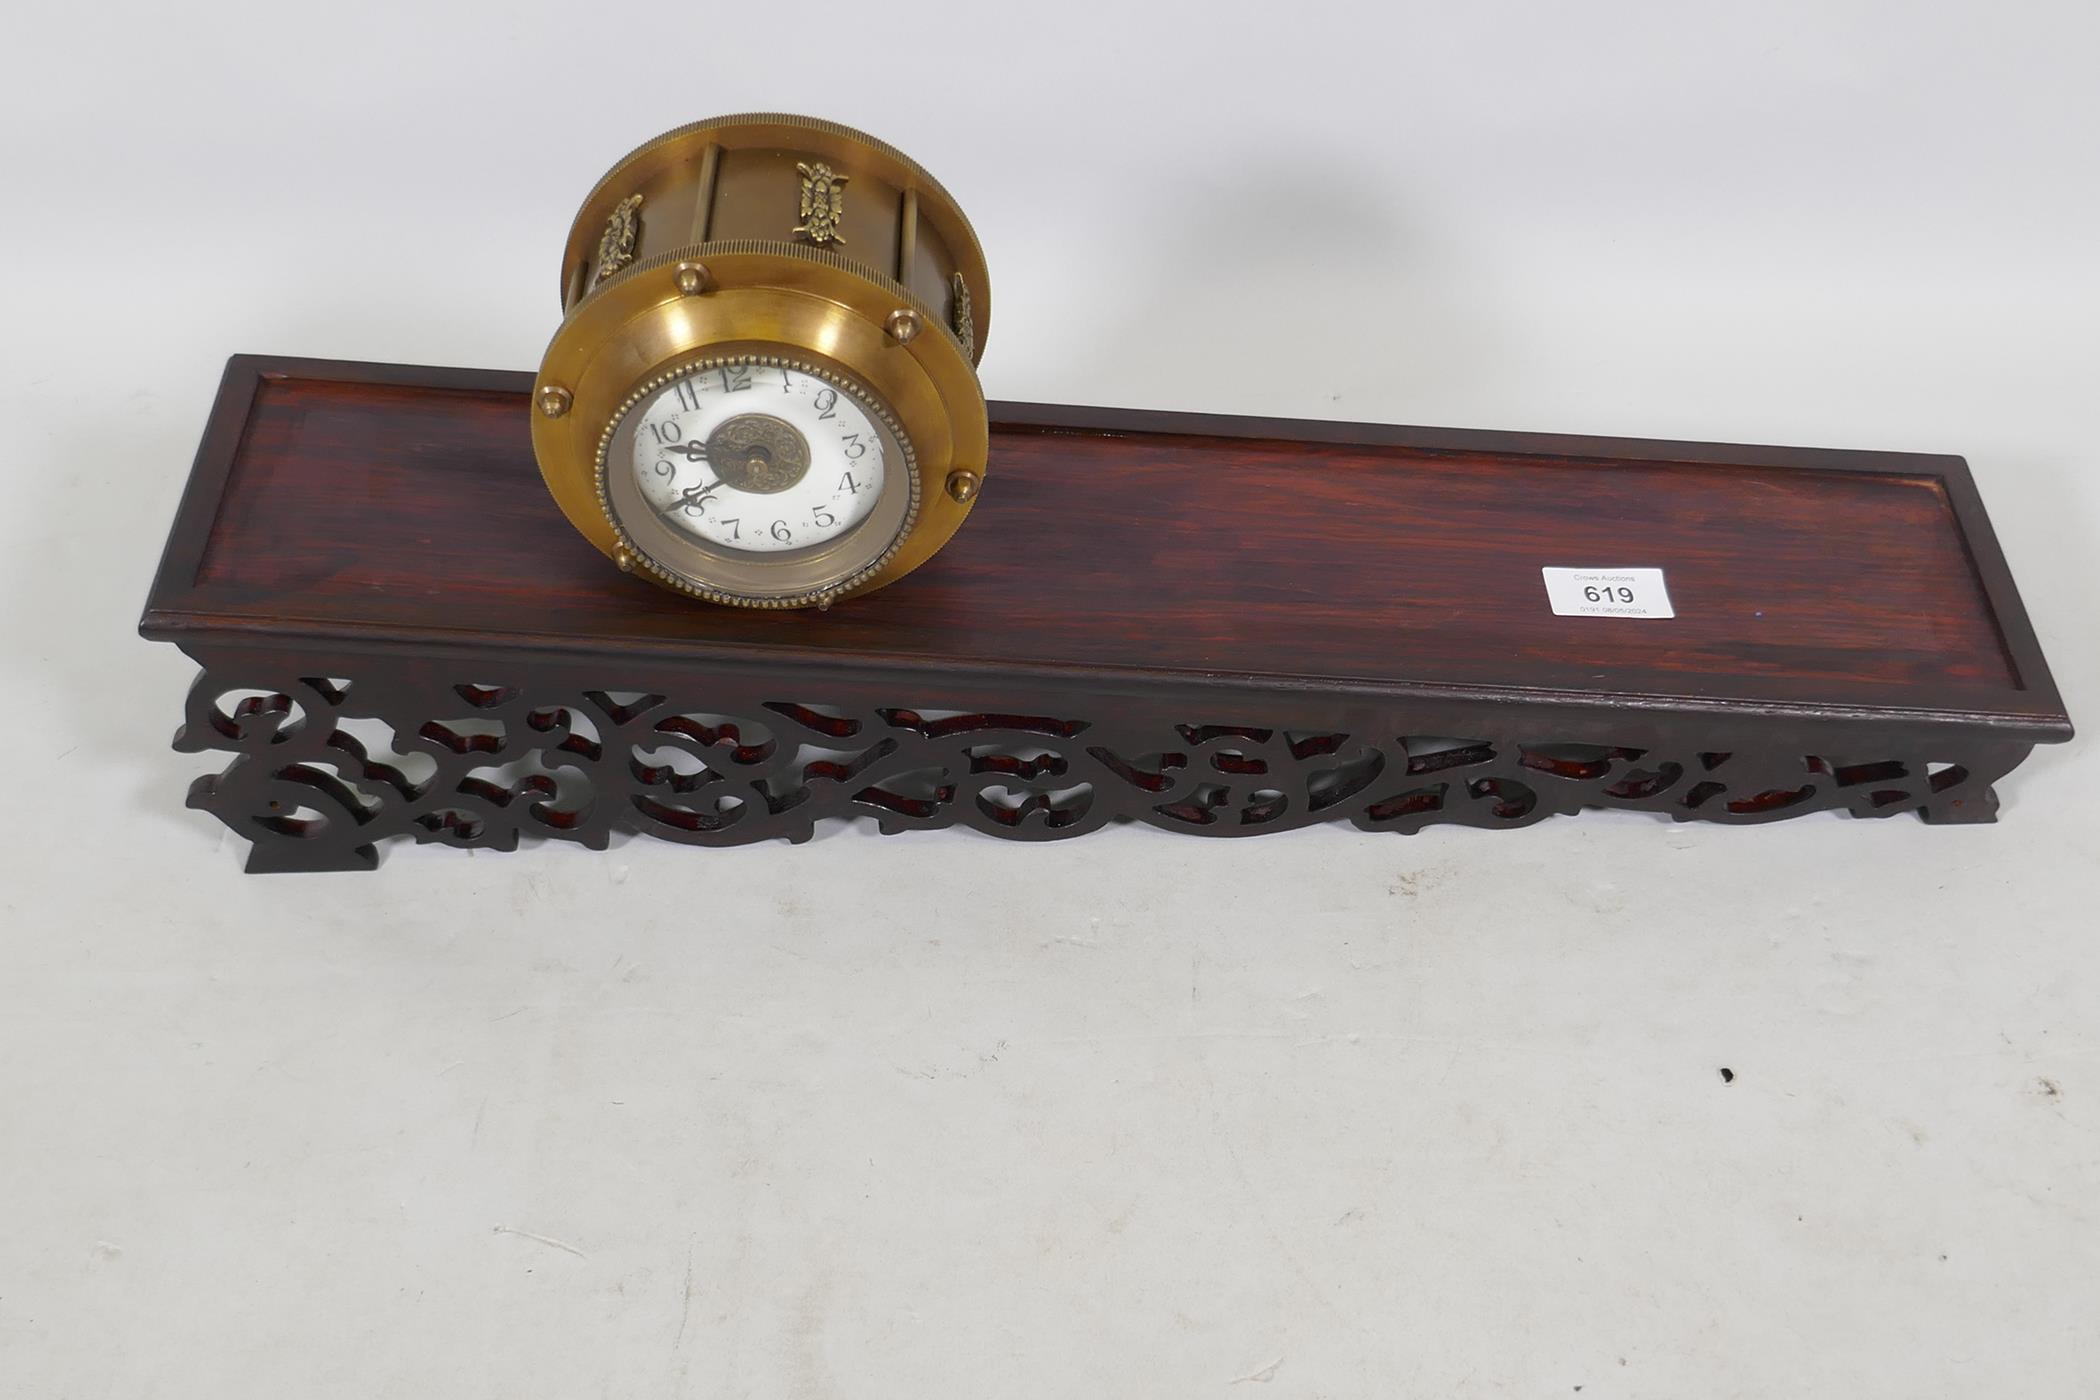 A brass cased gravity driven incline rolling clock with enamel dial and Arabic numerals, standing on - Image 3 of 3